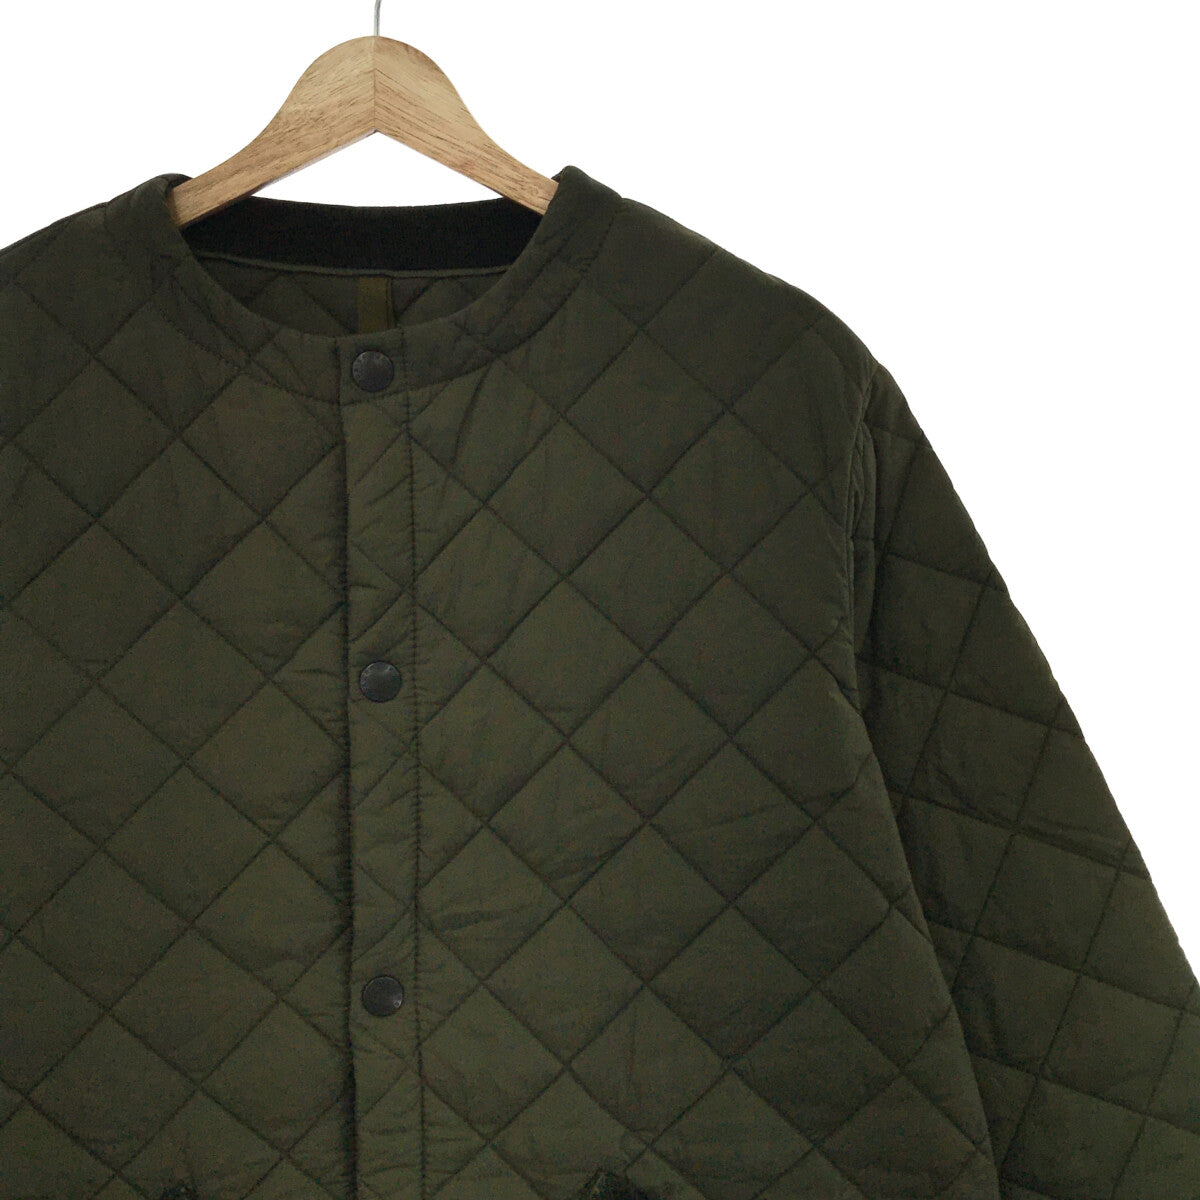 Barbour / バブアー | QUILTED NO COLLAR COAT ノーカラー コート | 10 